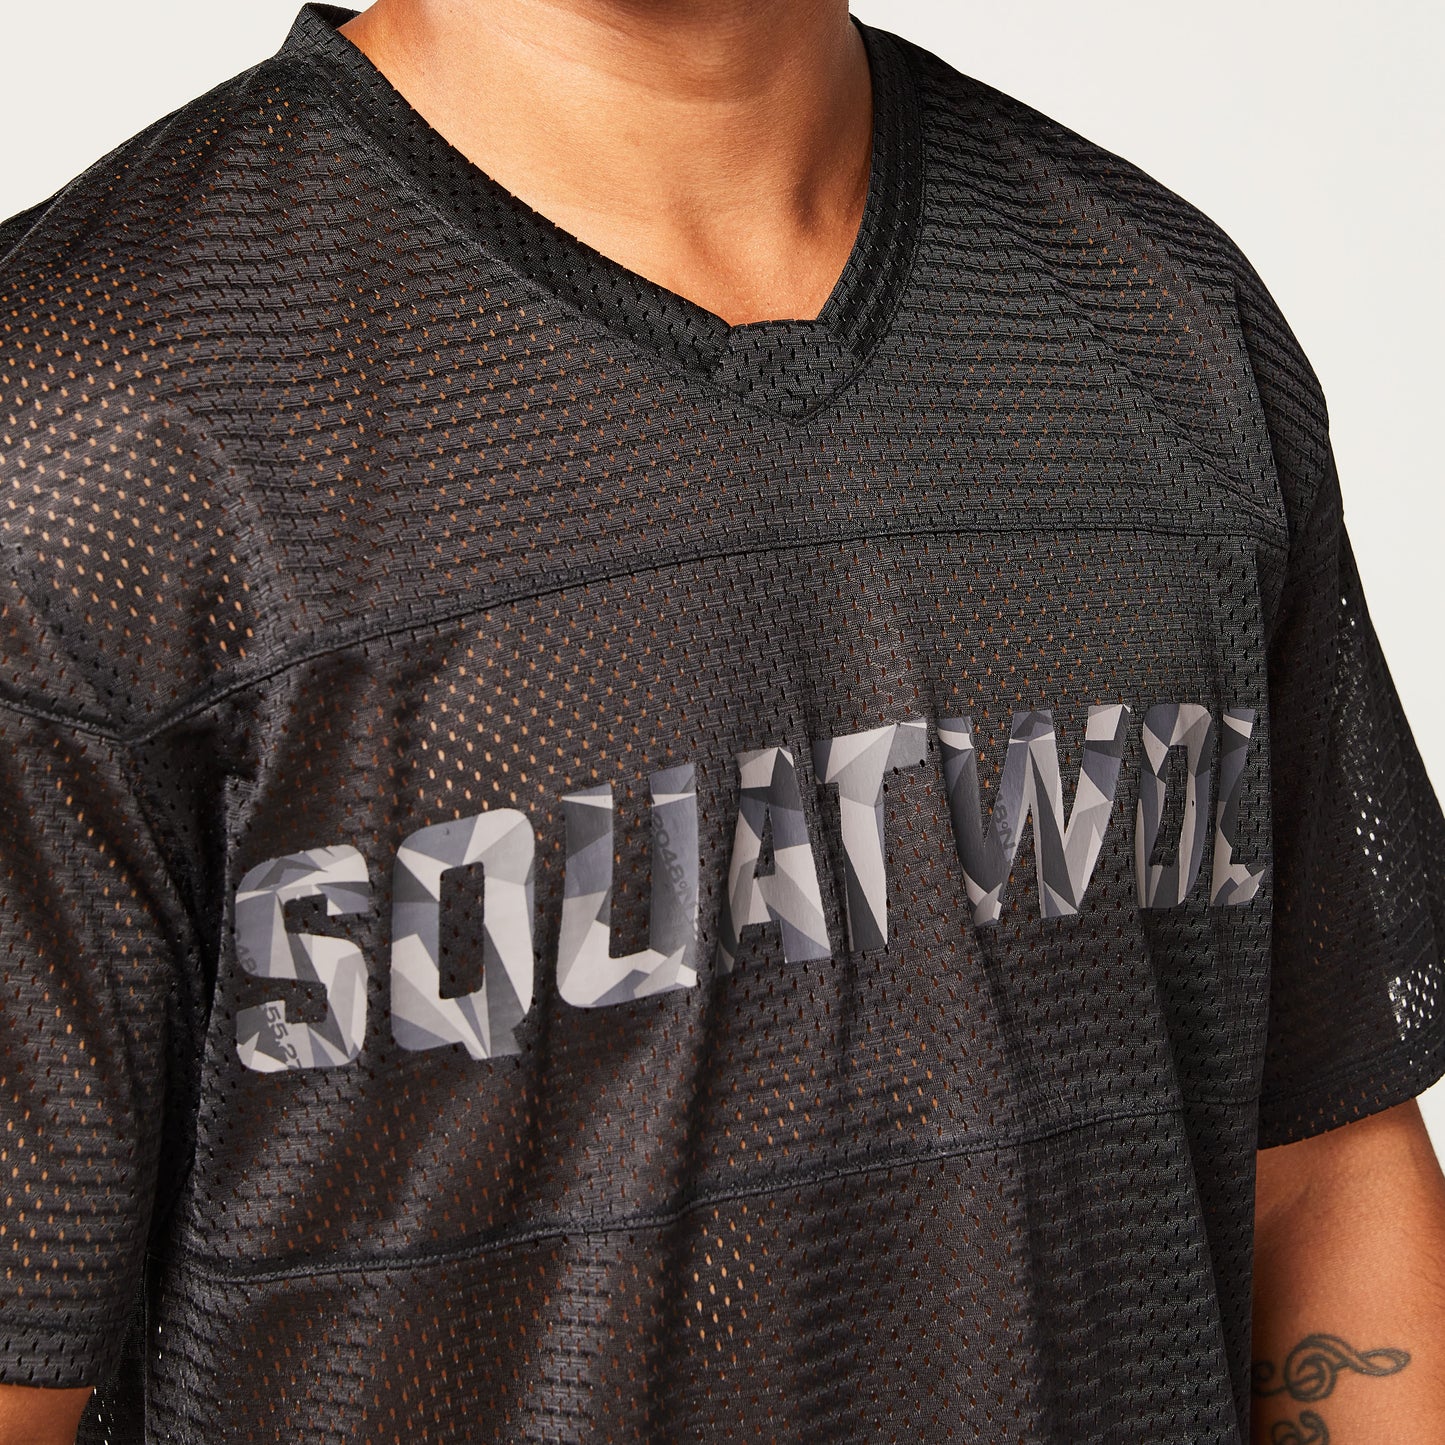 squatwolf-gym-wear-code-oversized-mesh-tee-black-workout-shirts-for-men